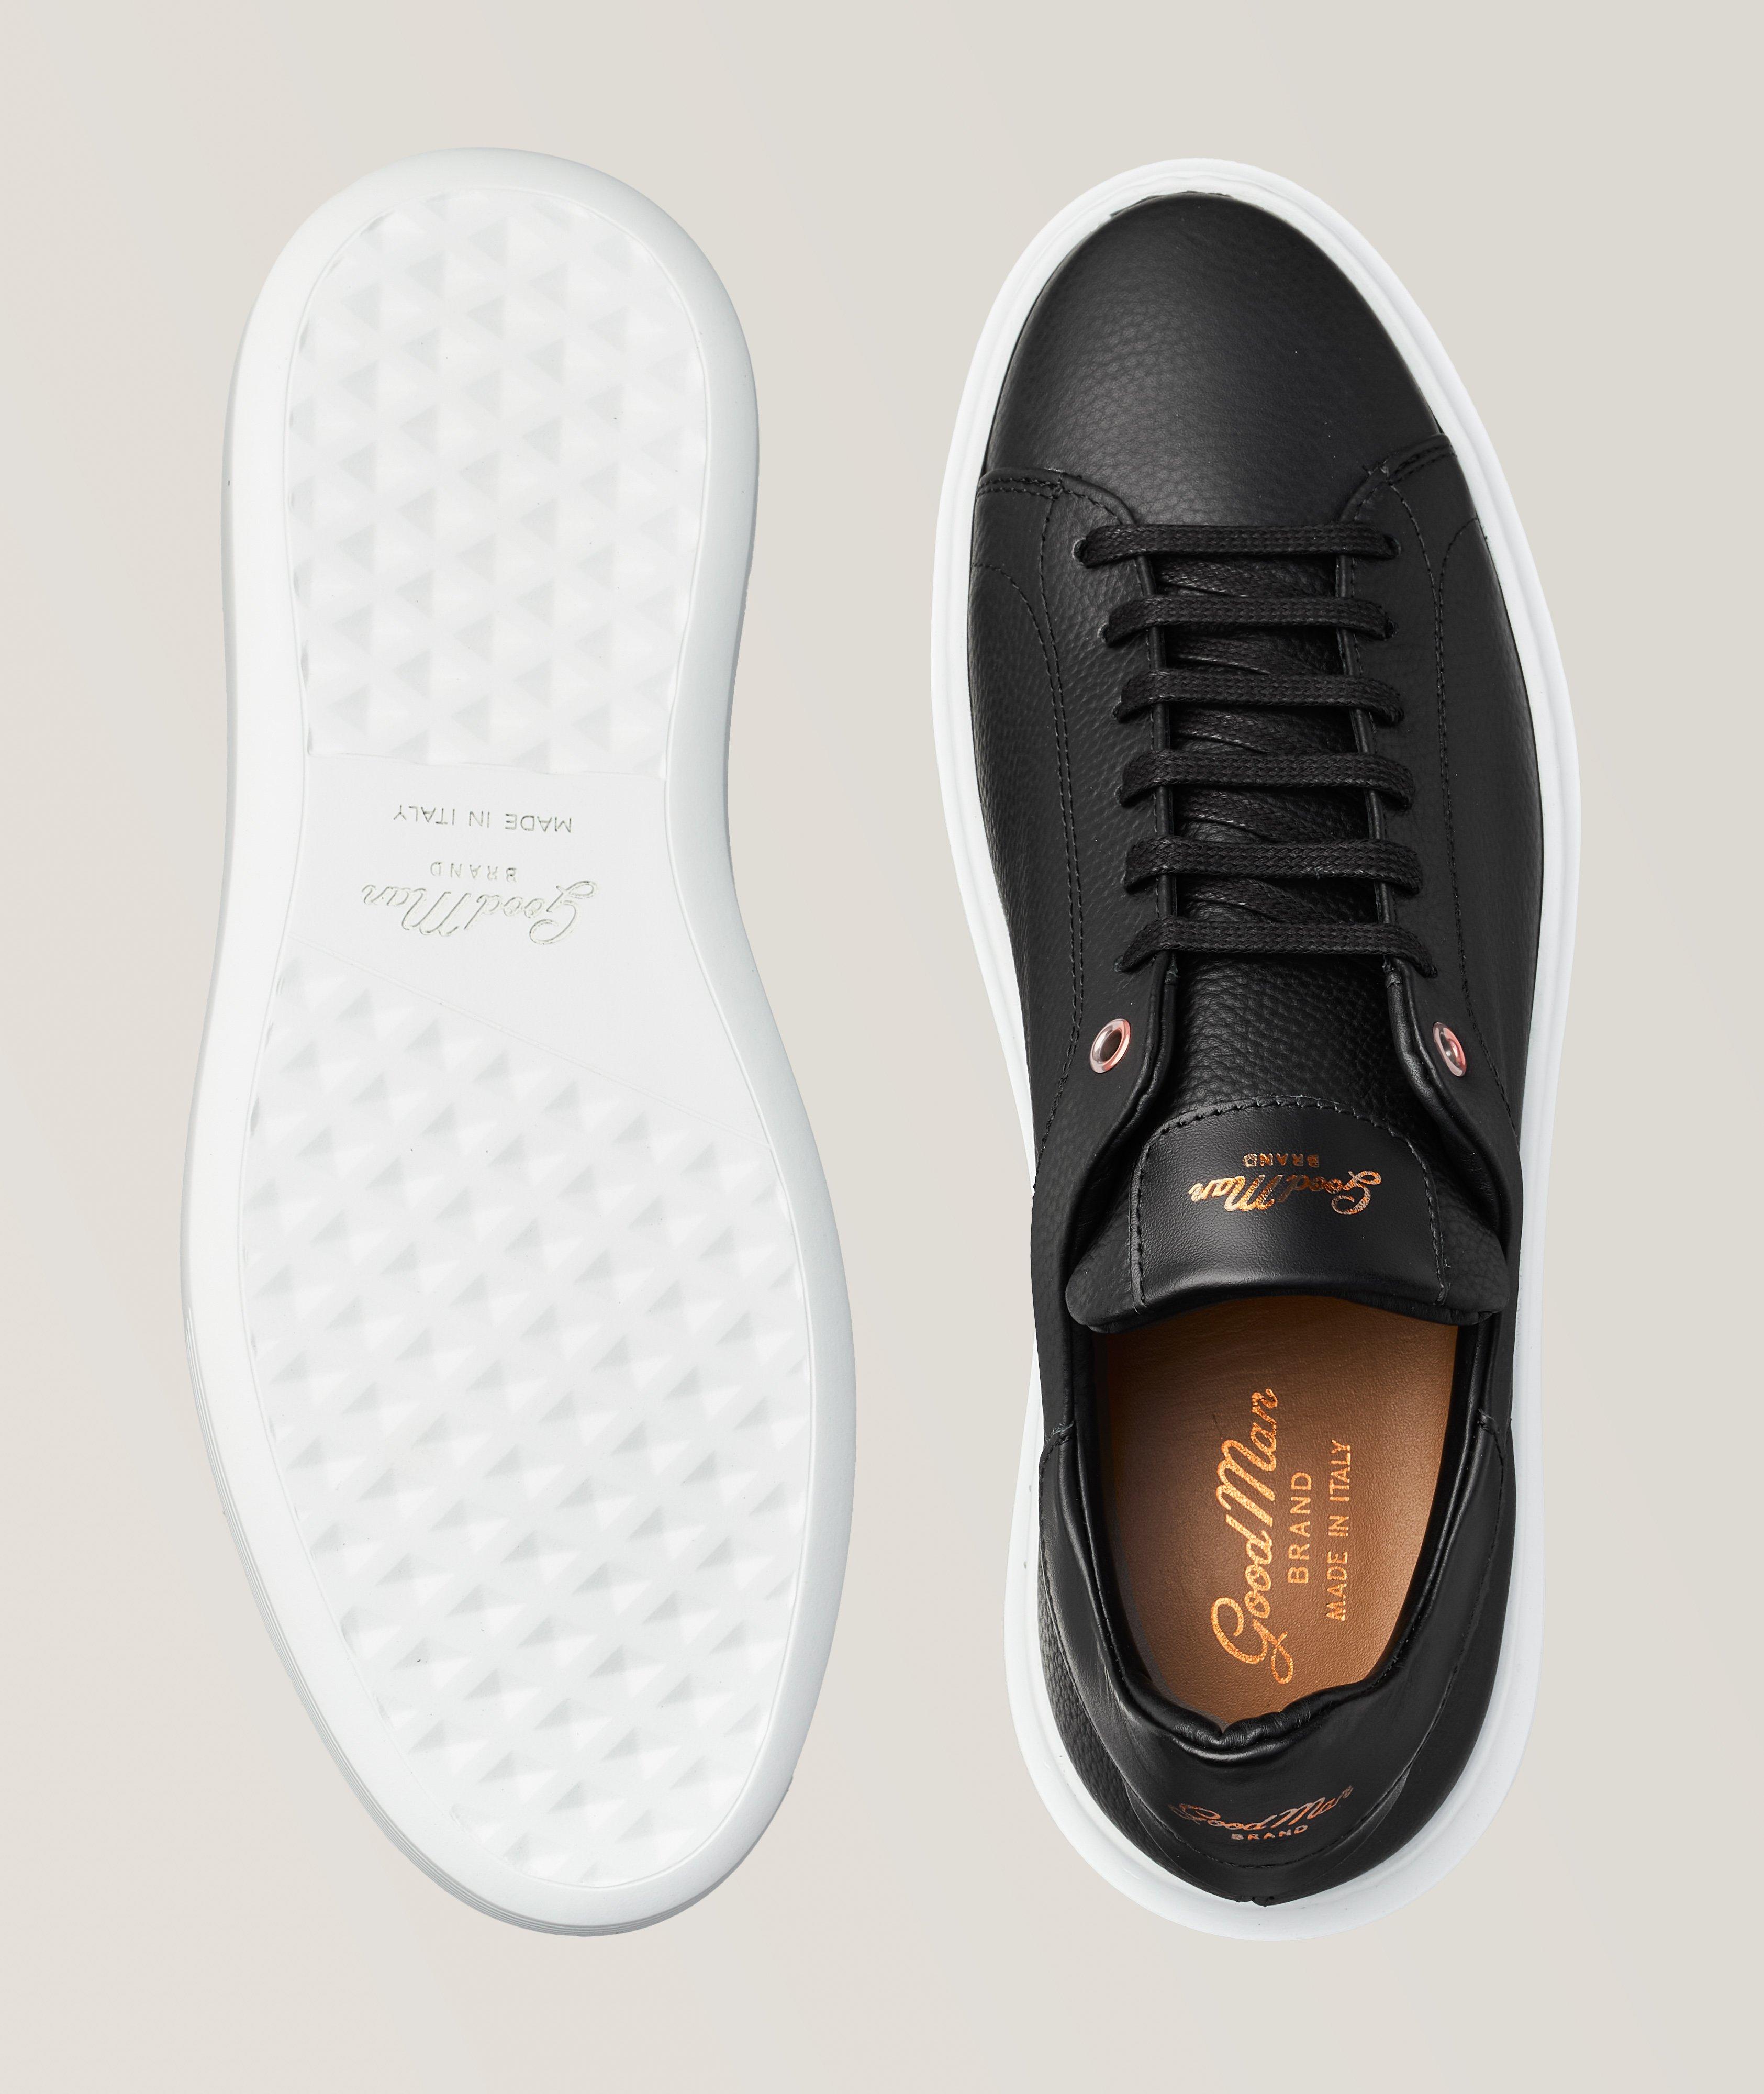 Legend London Pebbled Leather Sneakers